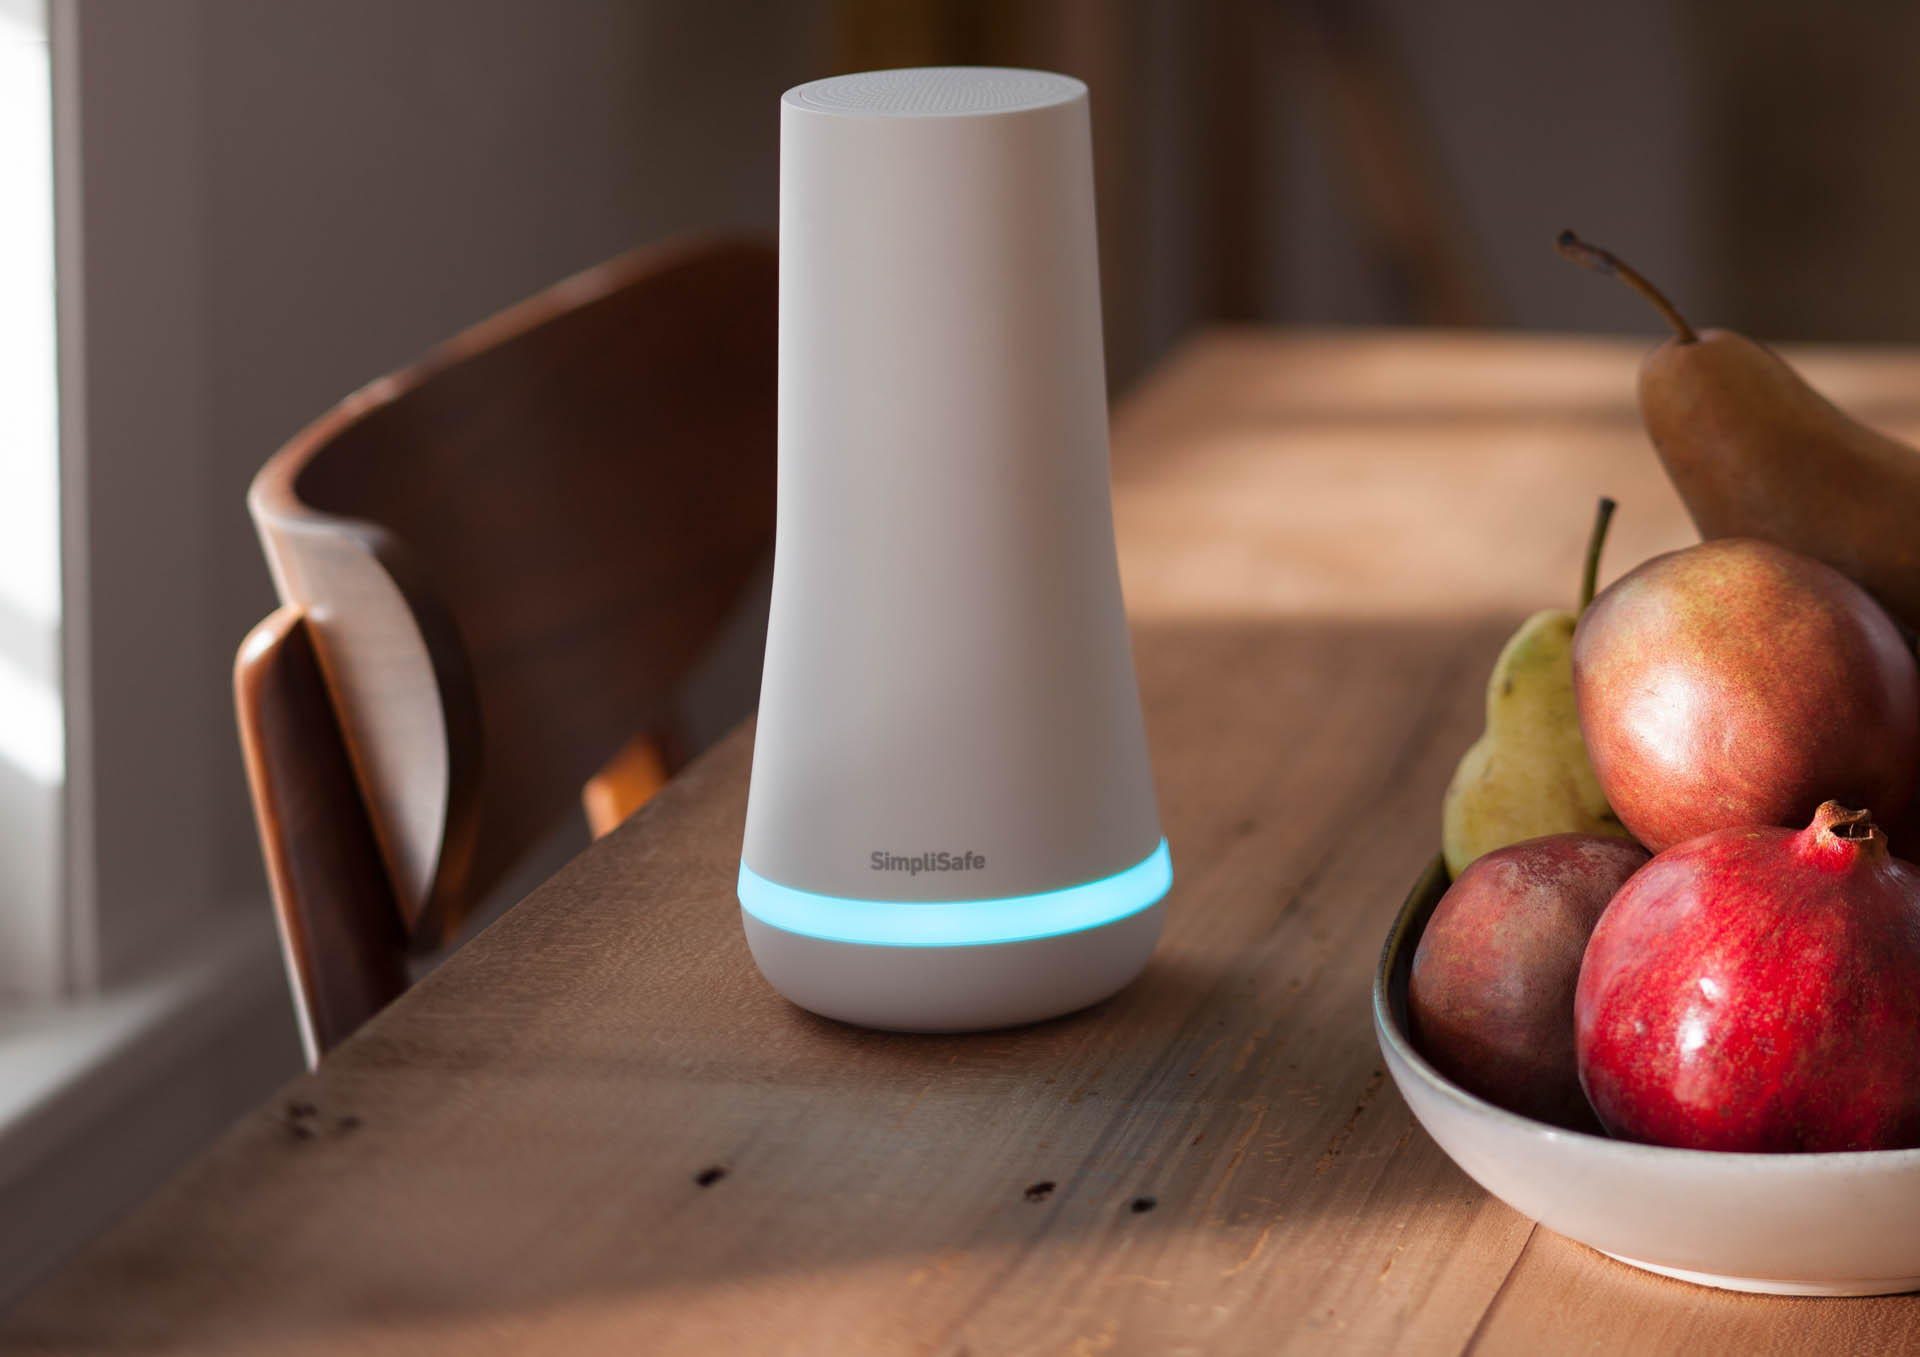 Smart security systems, like those from SimpliSafe, are at the top of the list of recommended upgrades. Image: SimpliSafe.